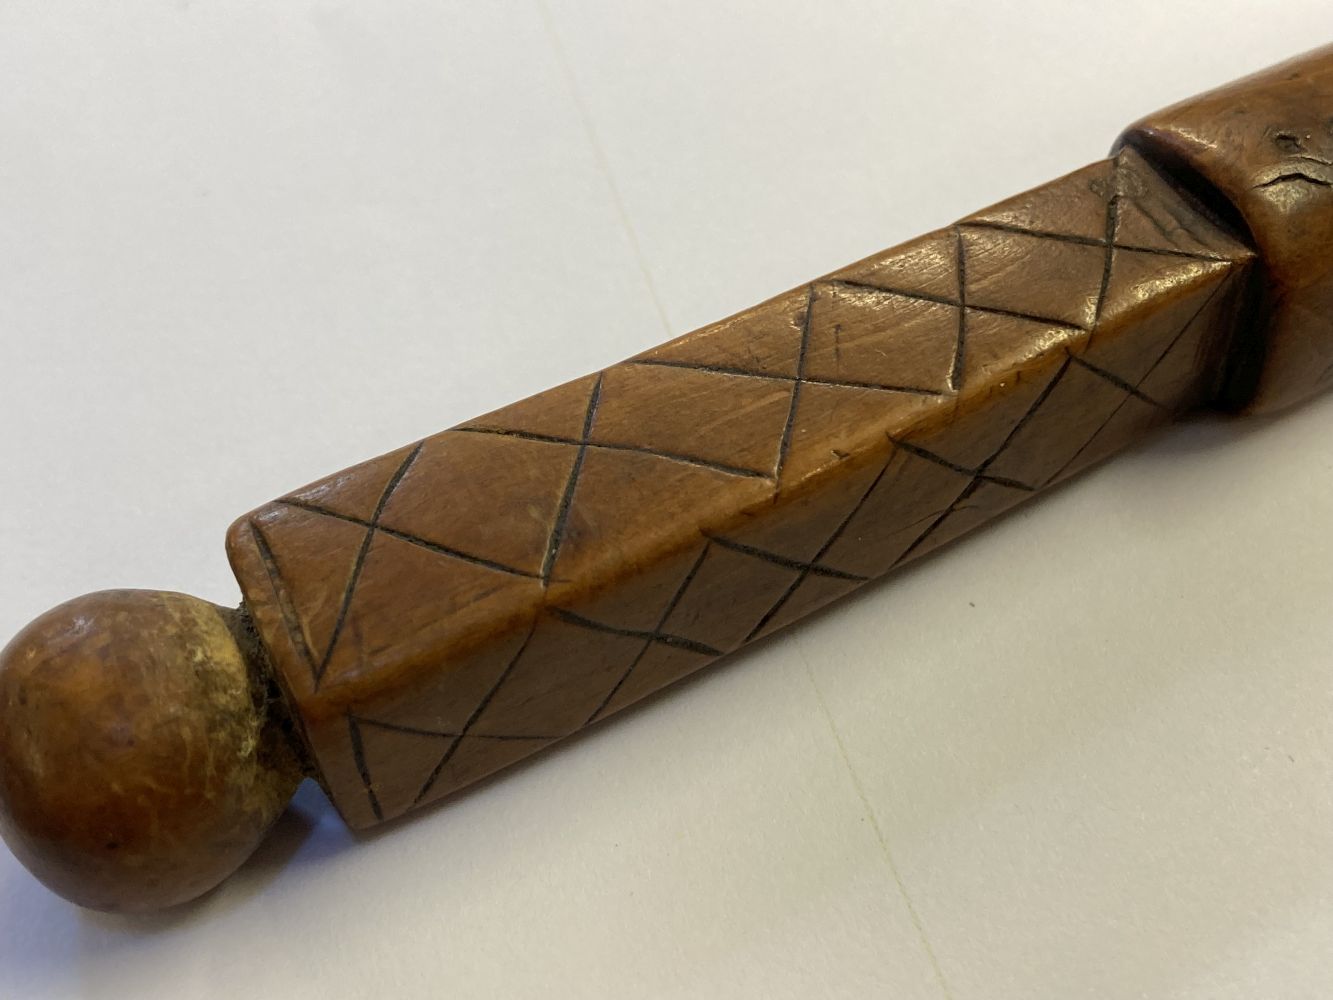 Treen. A 17th century treen apple corer dated 1696 - Image 10 of 10